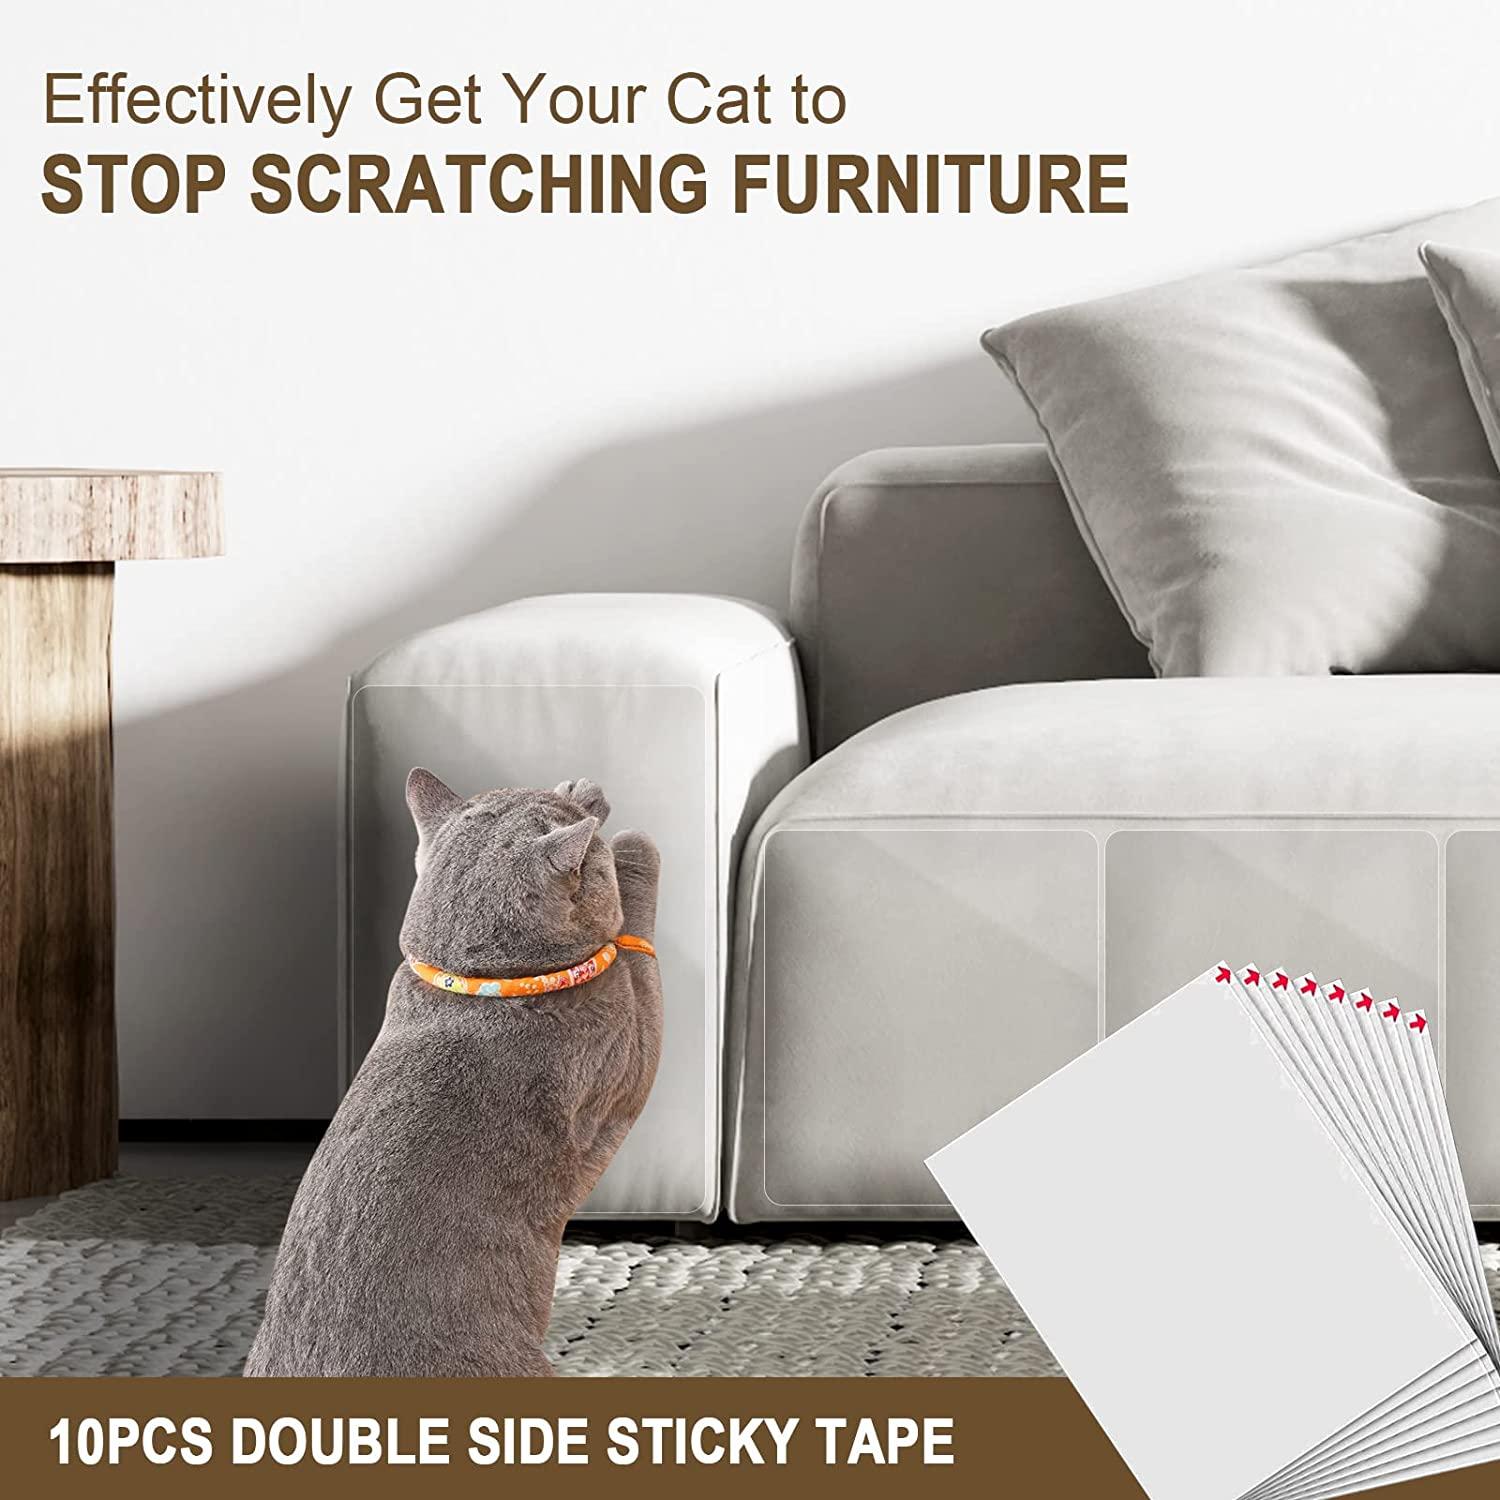 Anti Cat Scratch Furniture Protectors from Cats, Cat Scratch Deterrent  Tape, Double Sided Anti Scratching Sticky Tape, Clear Training Tape, Corner  Couch Protector for Cats 10PCS